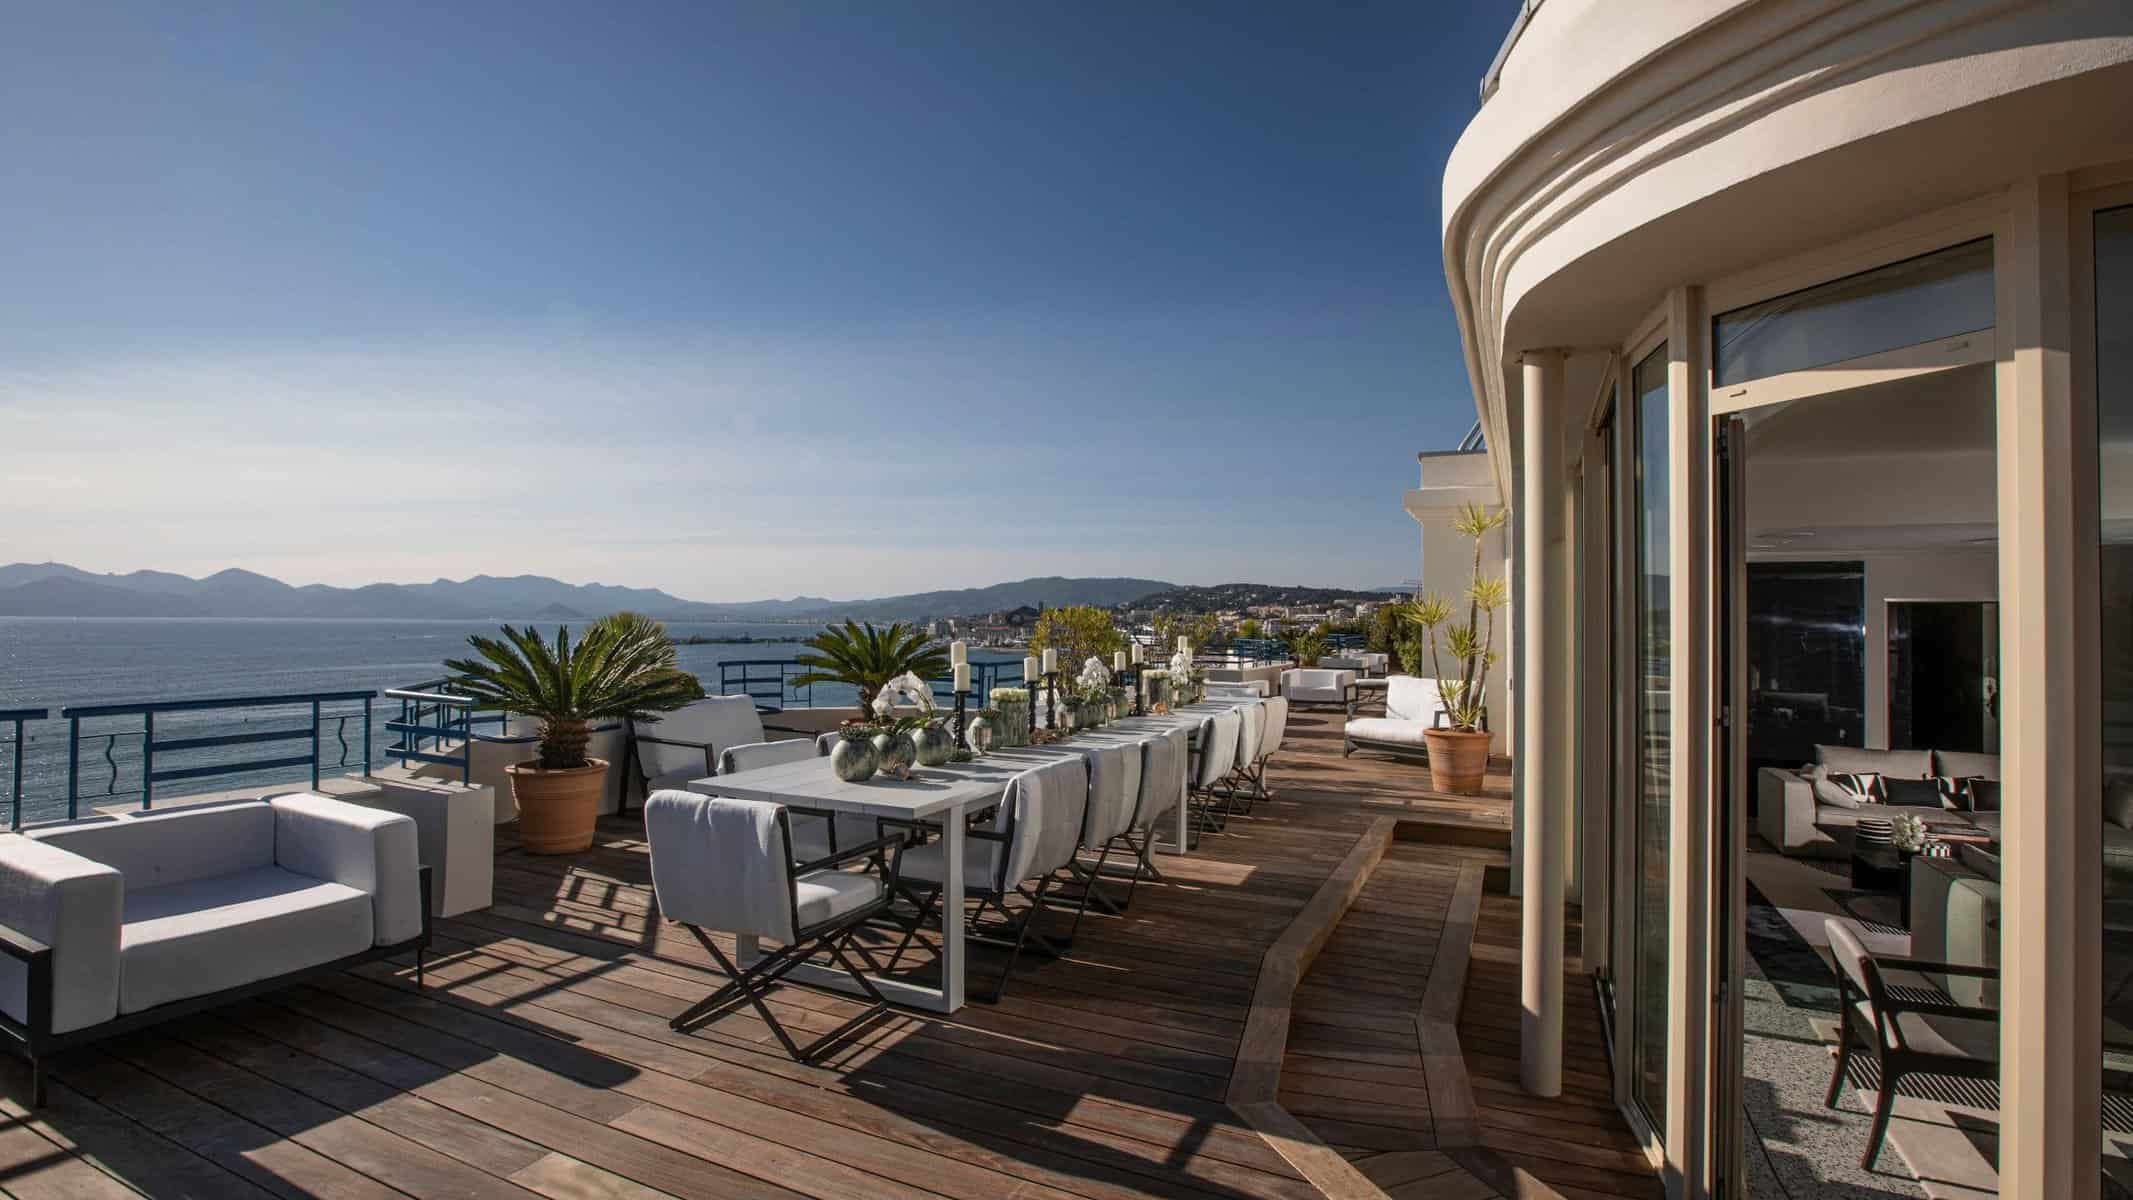 The Penthouse Suite at Grand Hyatt Hotel Martinez Cannes Terrace